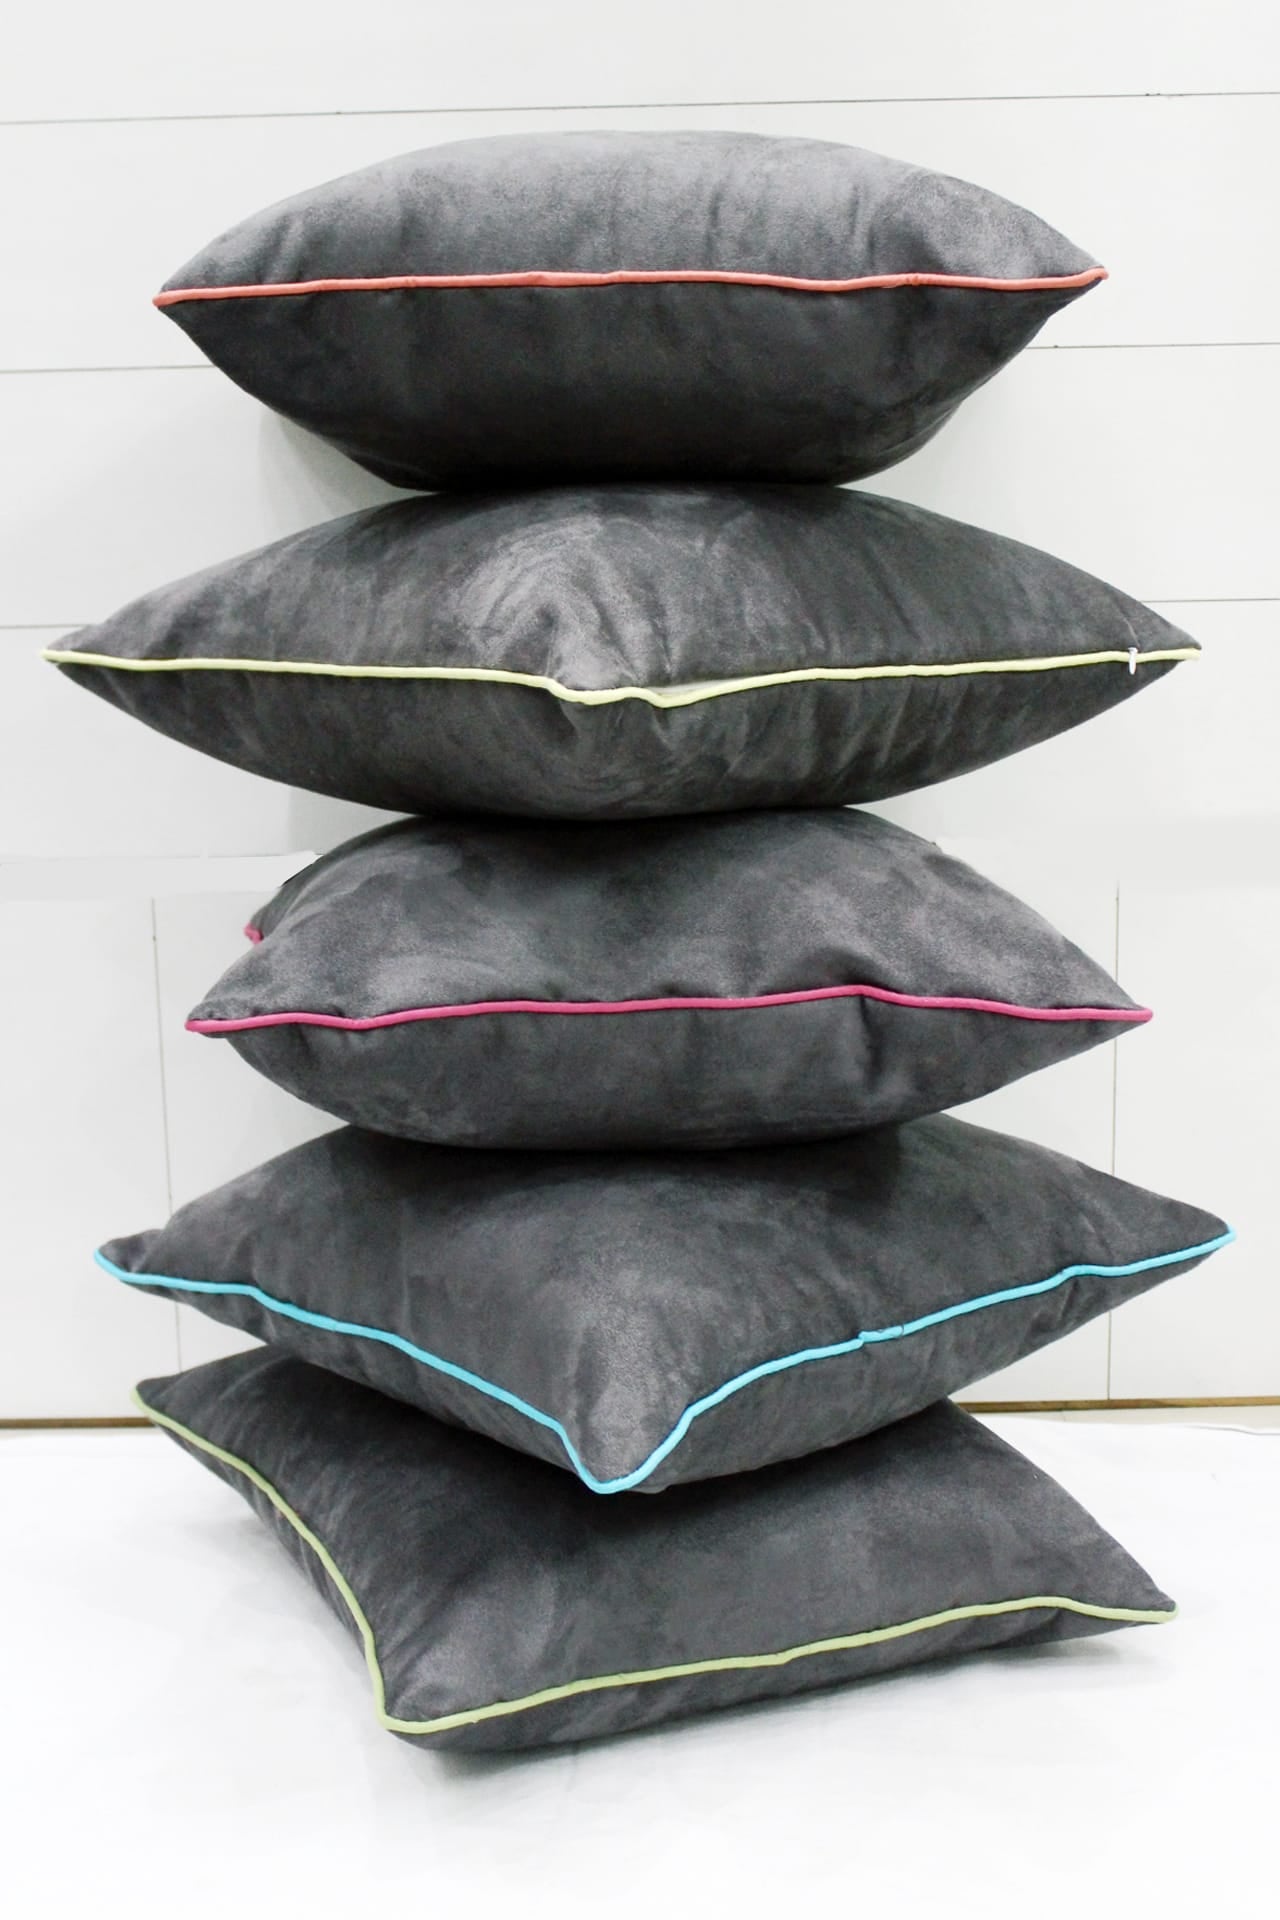 Soft Suede Velvet Cushion Cover Set in Grey online in India(5 Pcs)